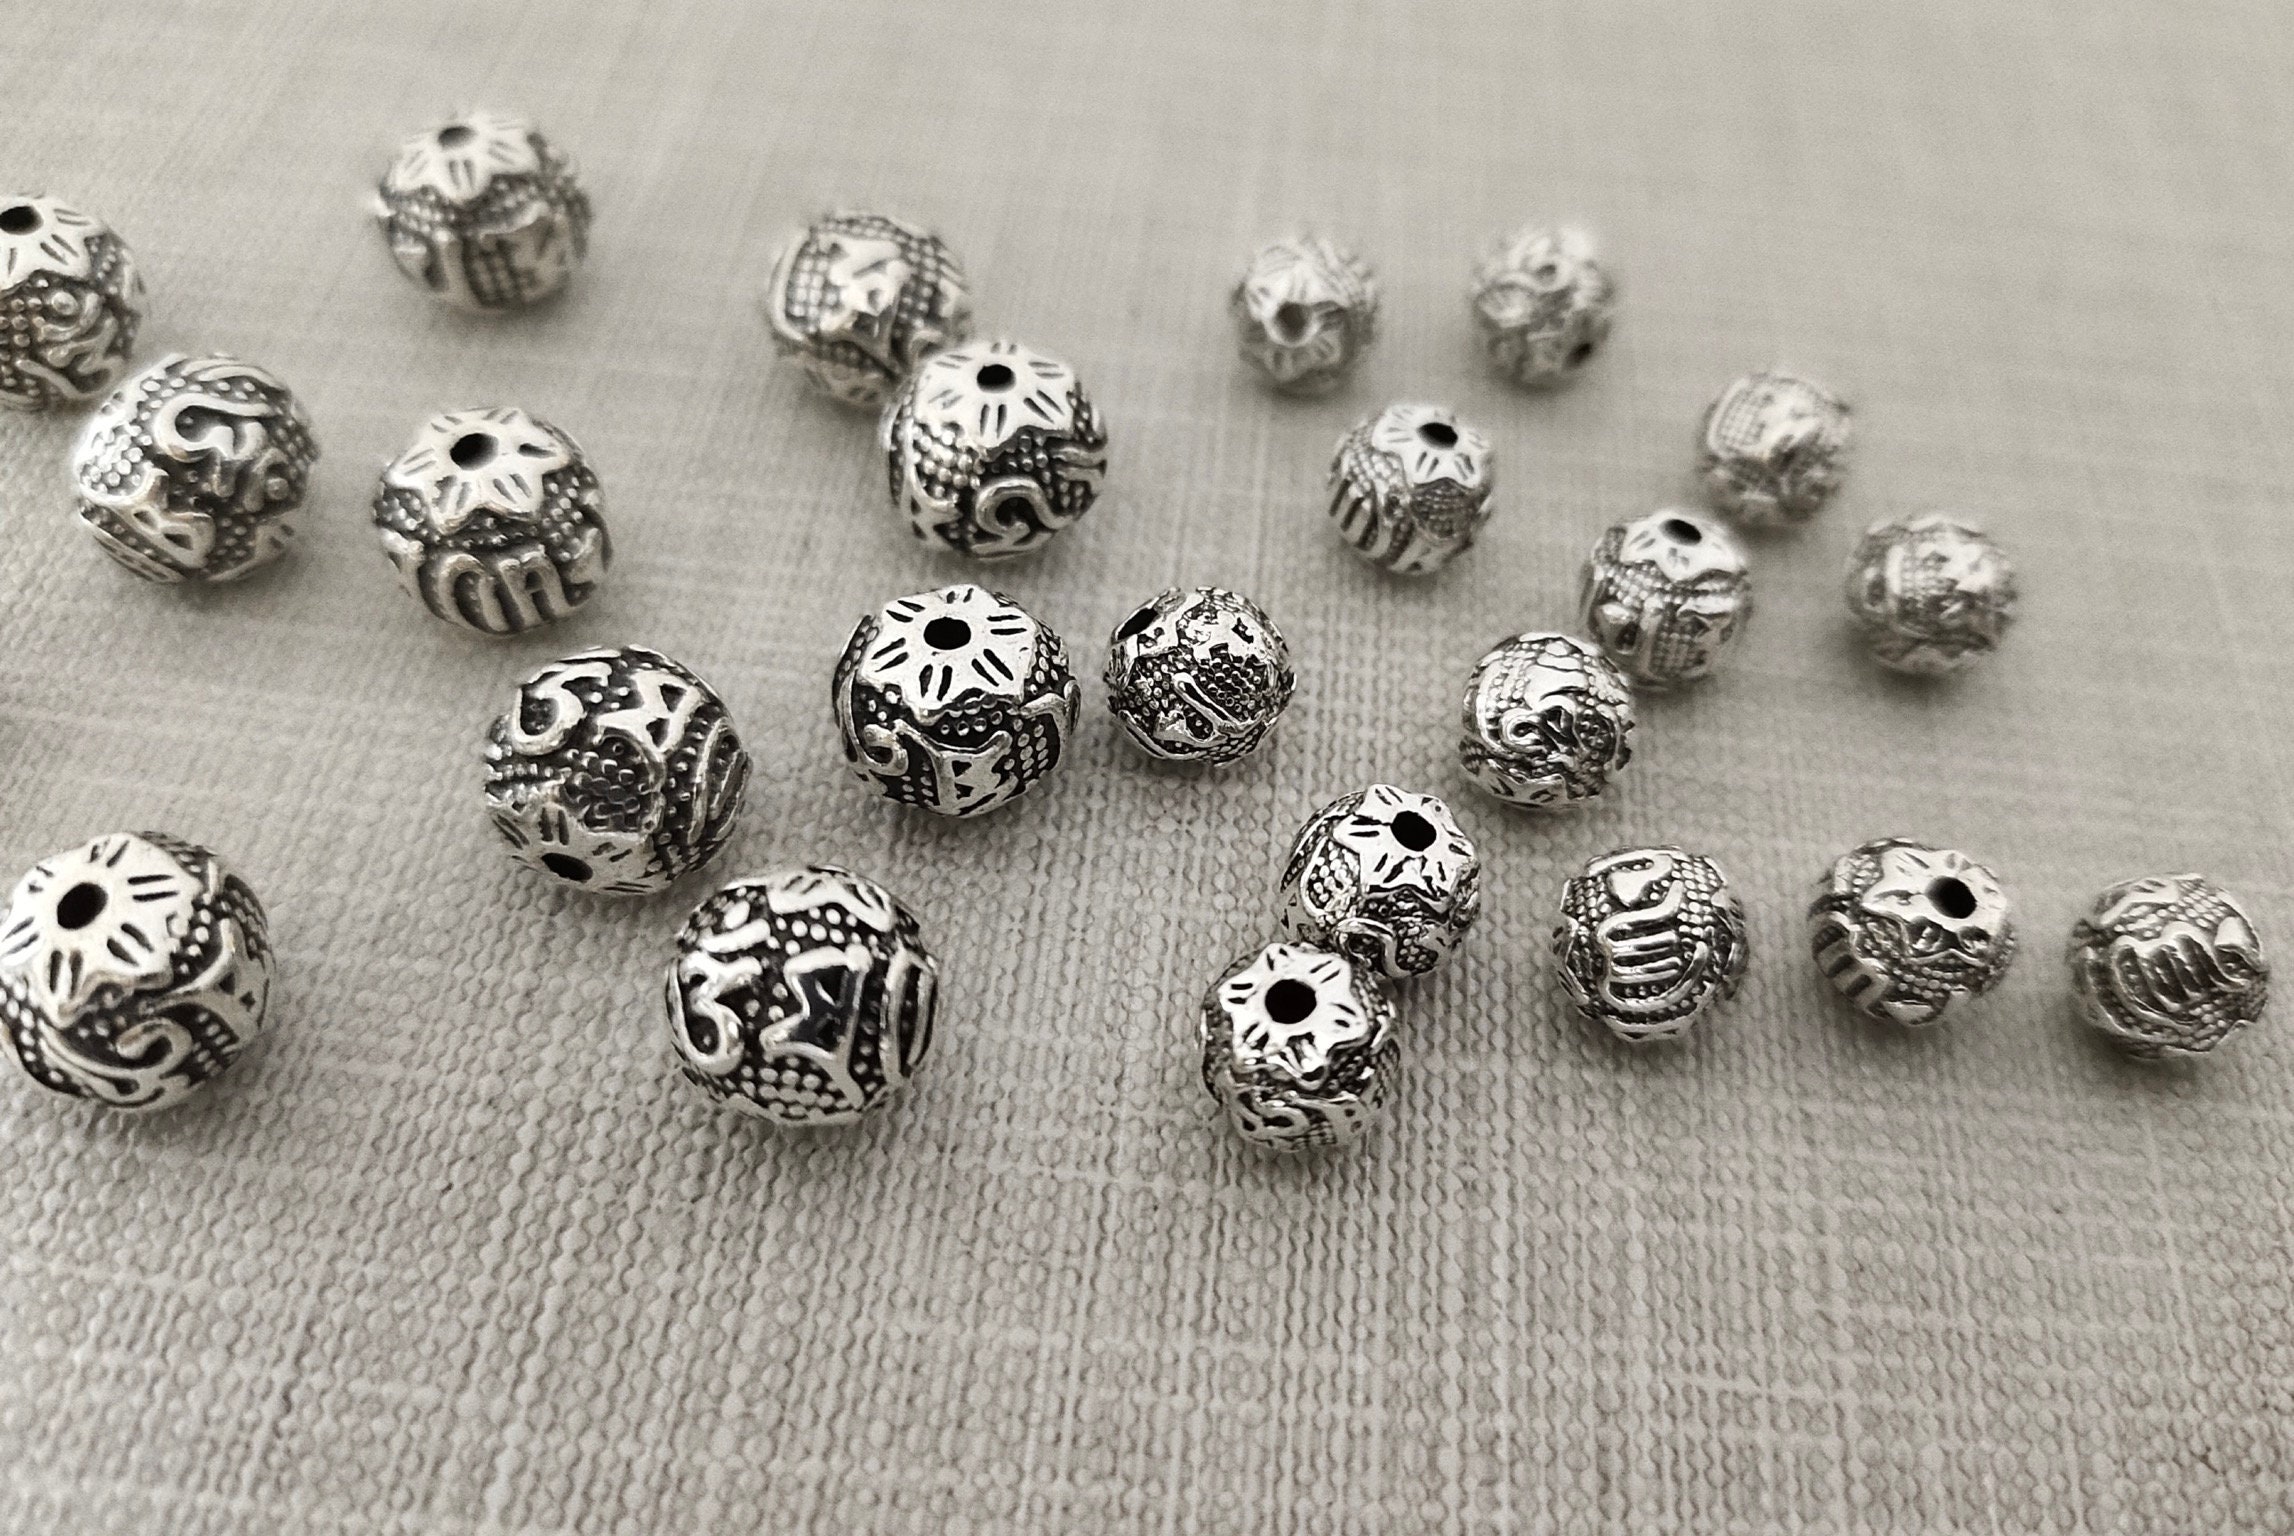 Tibetan Silver Bail Spacer Beads (T8272) - 25 pieces